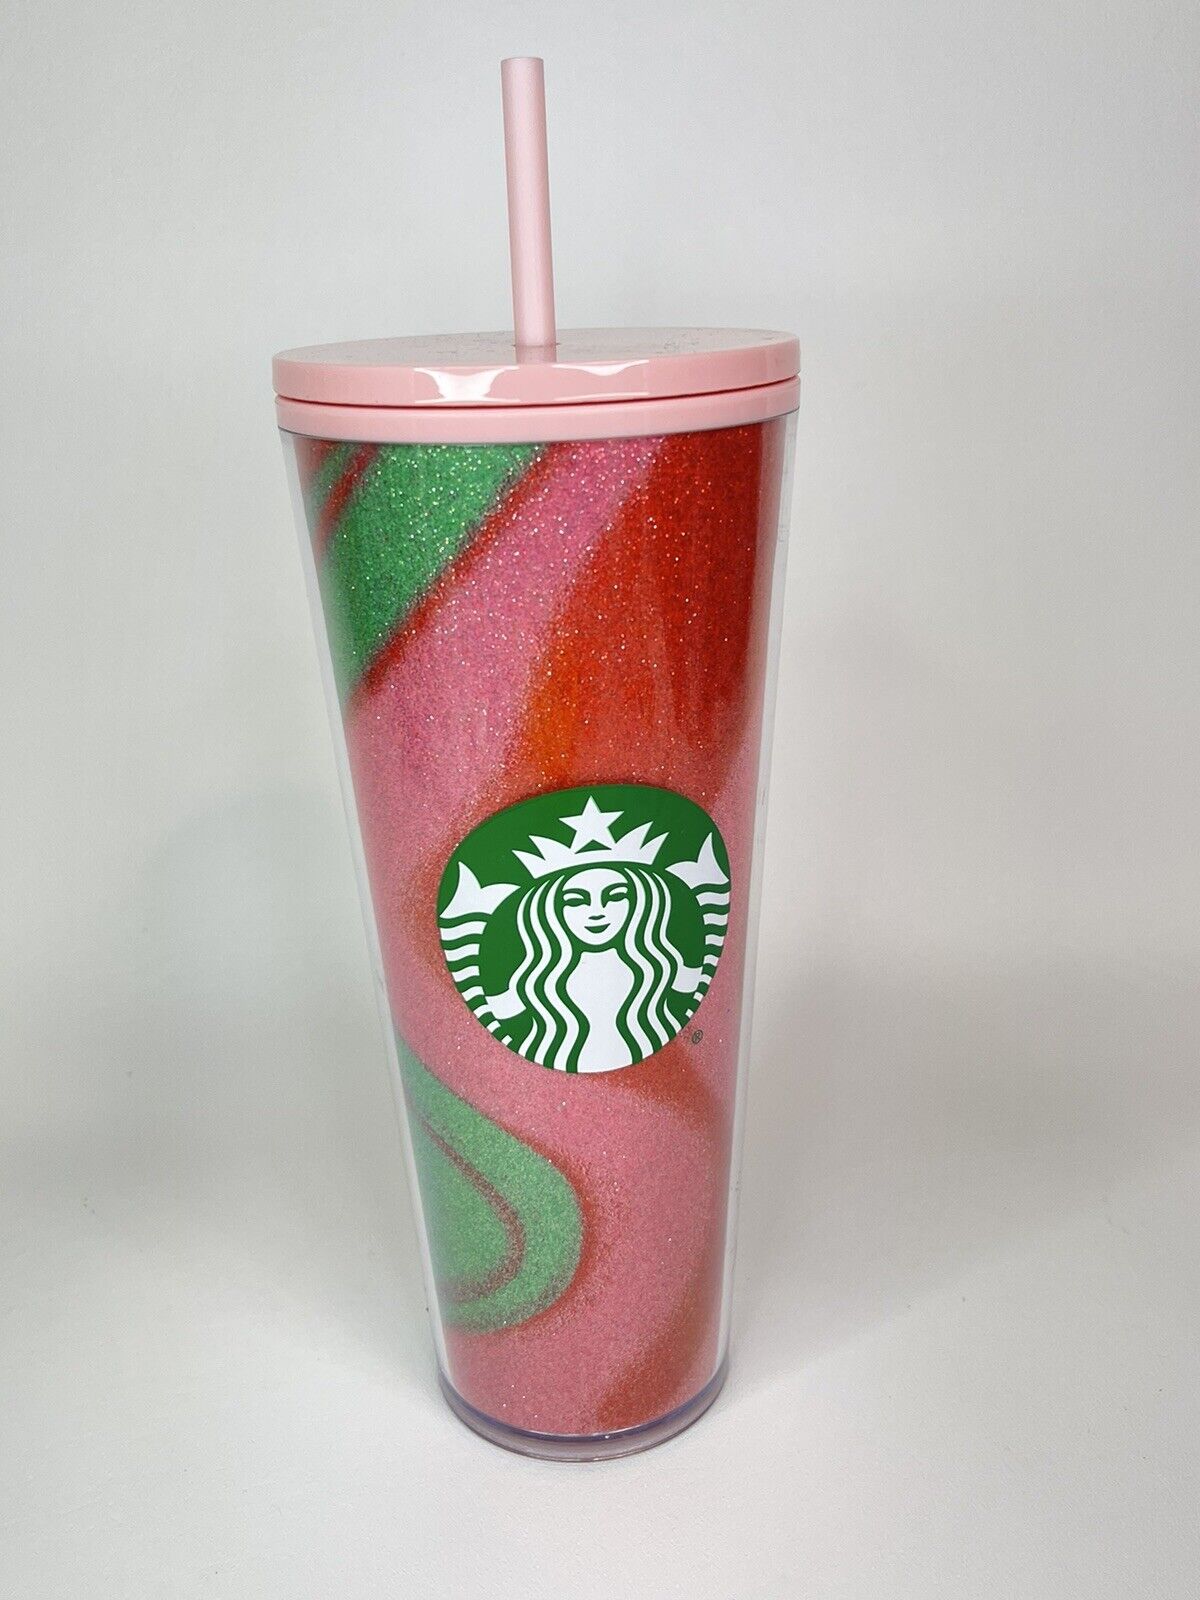 Starbucks Christmas Pink Red Green Glitter Wavy Swirl Cold Cup Tumbler 24 oz